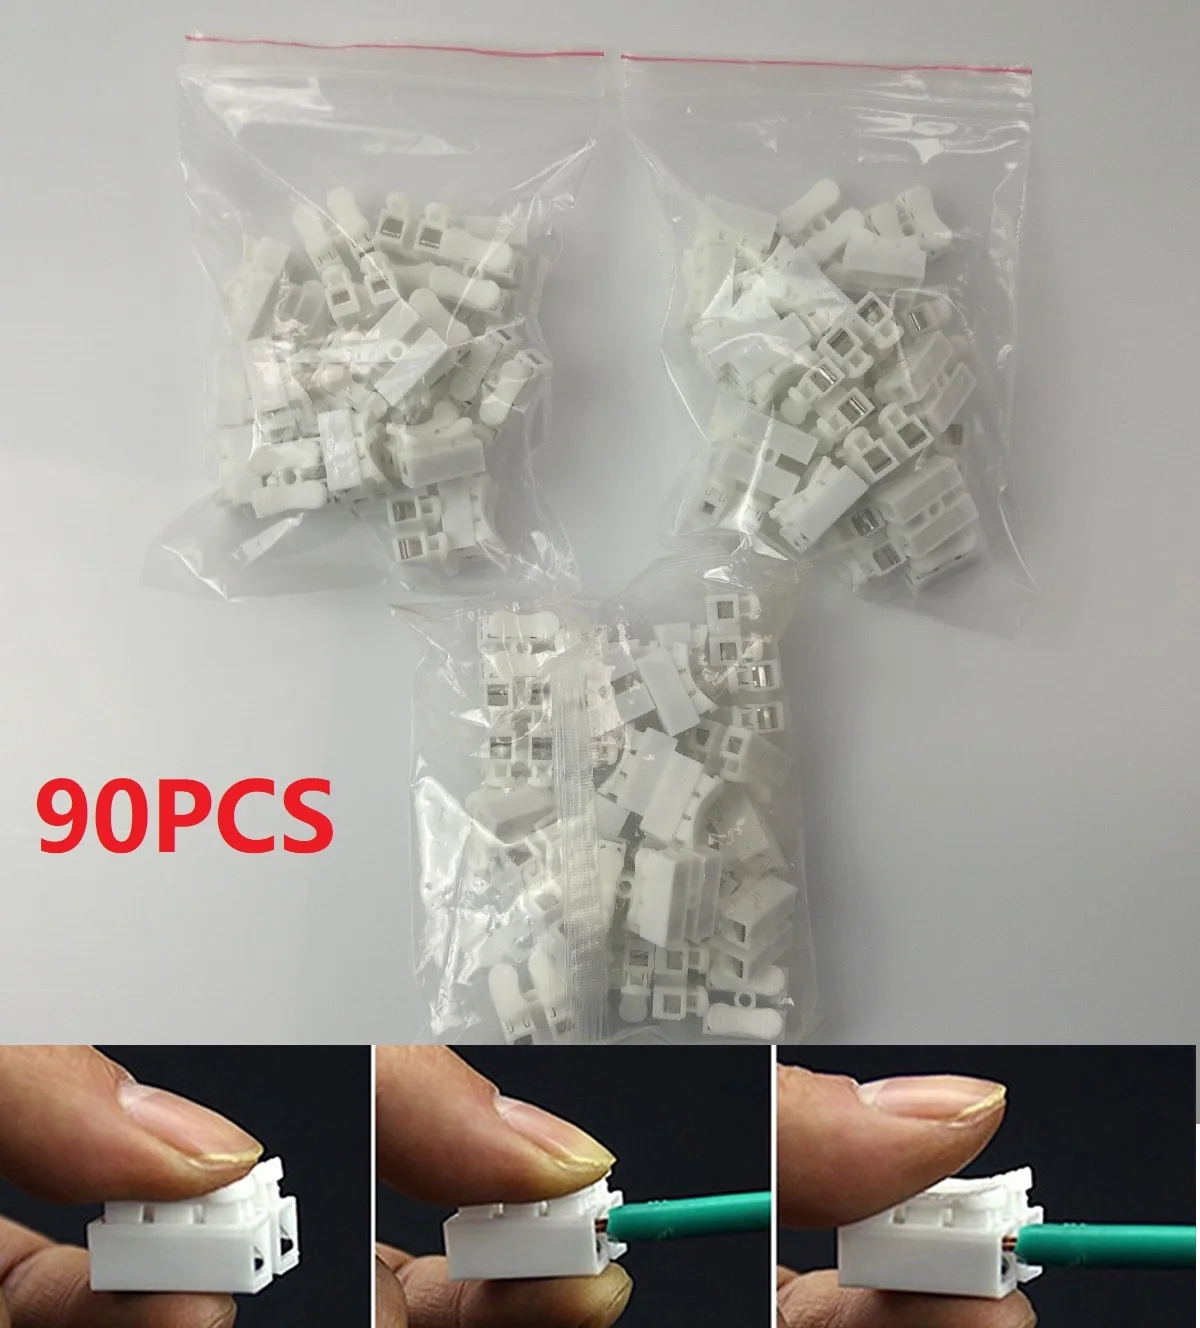 90pcs/set New Electrical 2Pins Cable Connectors CH2 Quick Splice Lock Wire Terminals